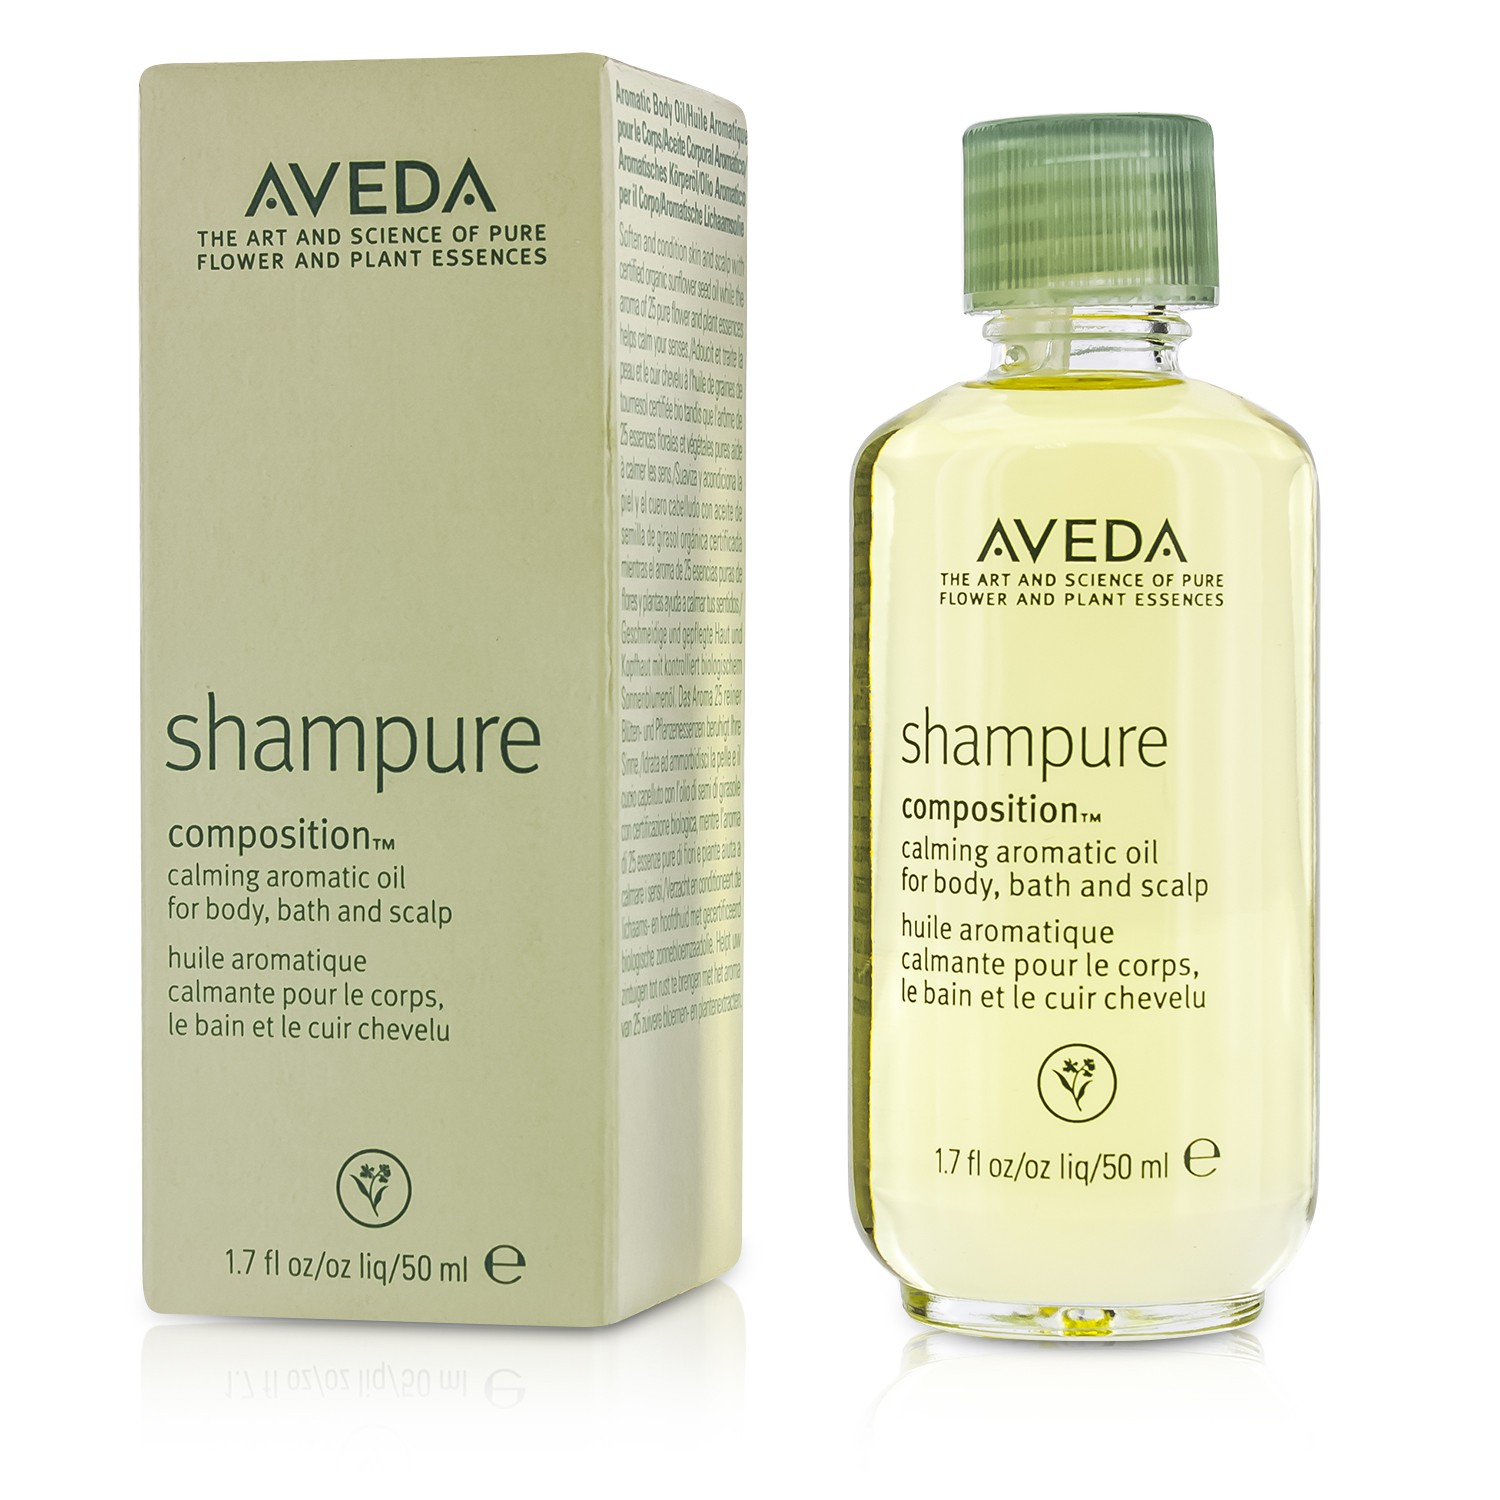 Shampure Composition Calming Aromatic Oil Aveda Image